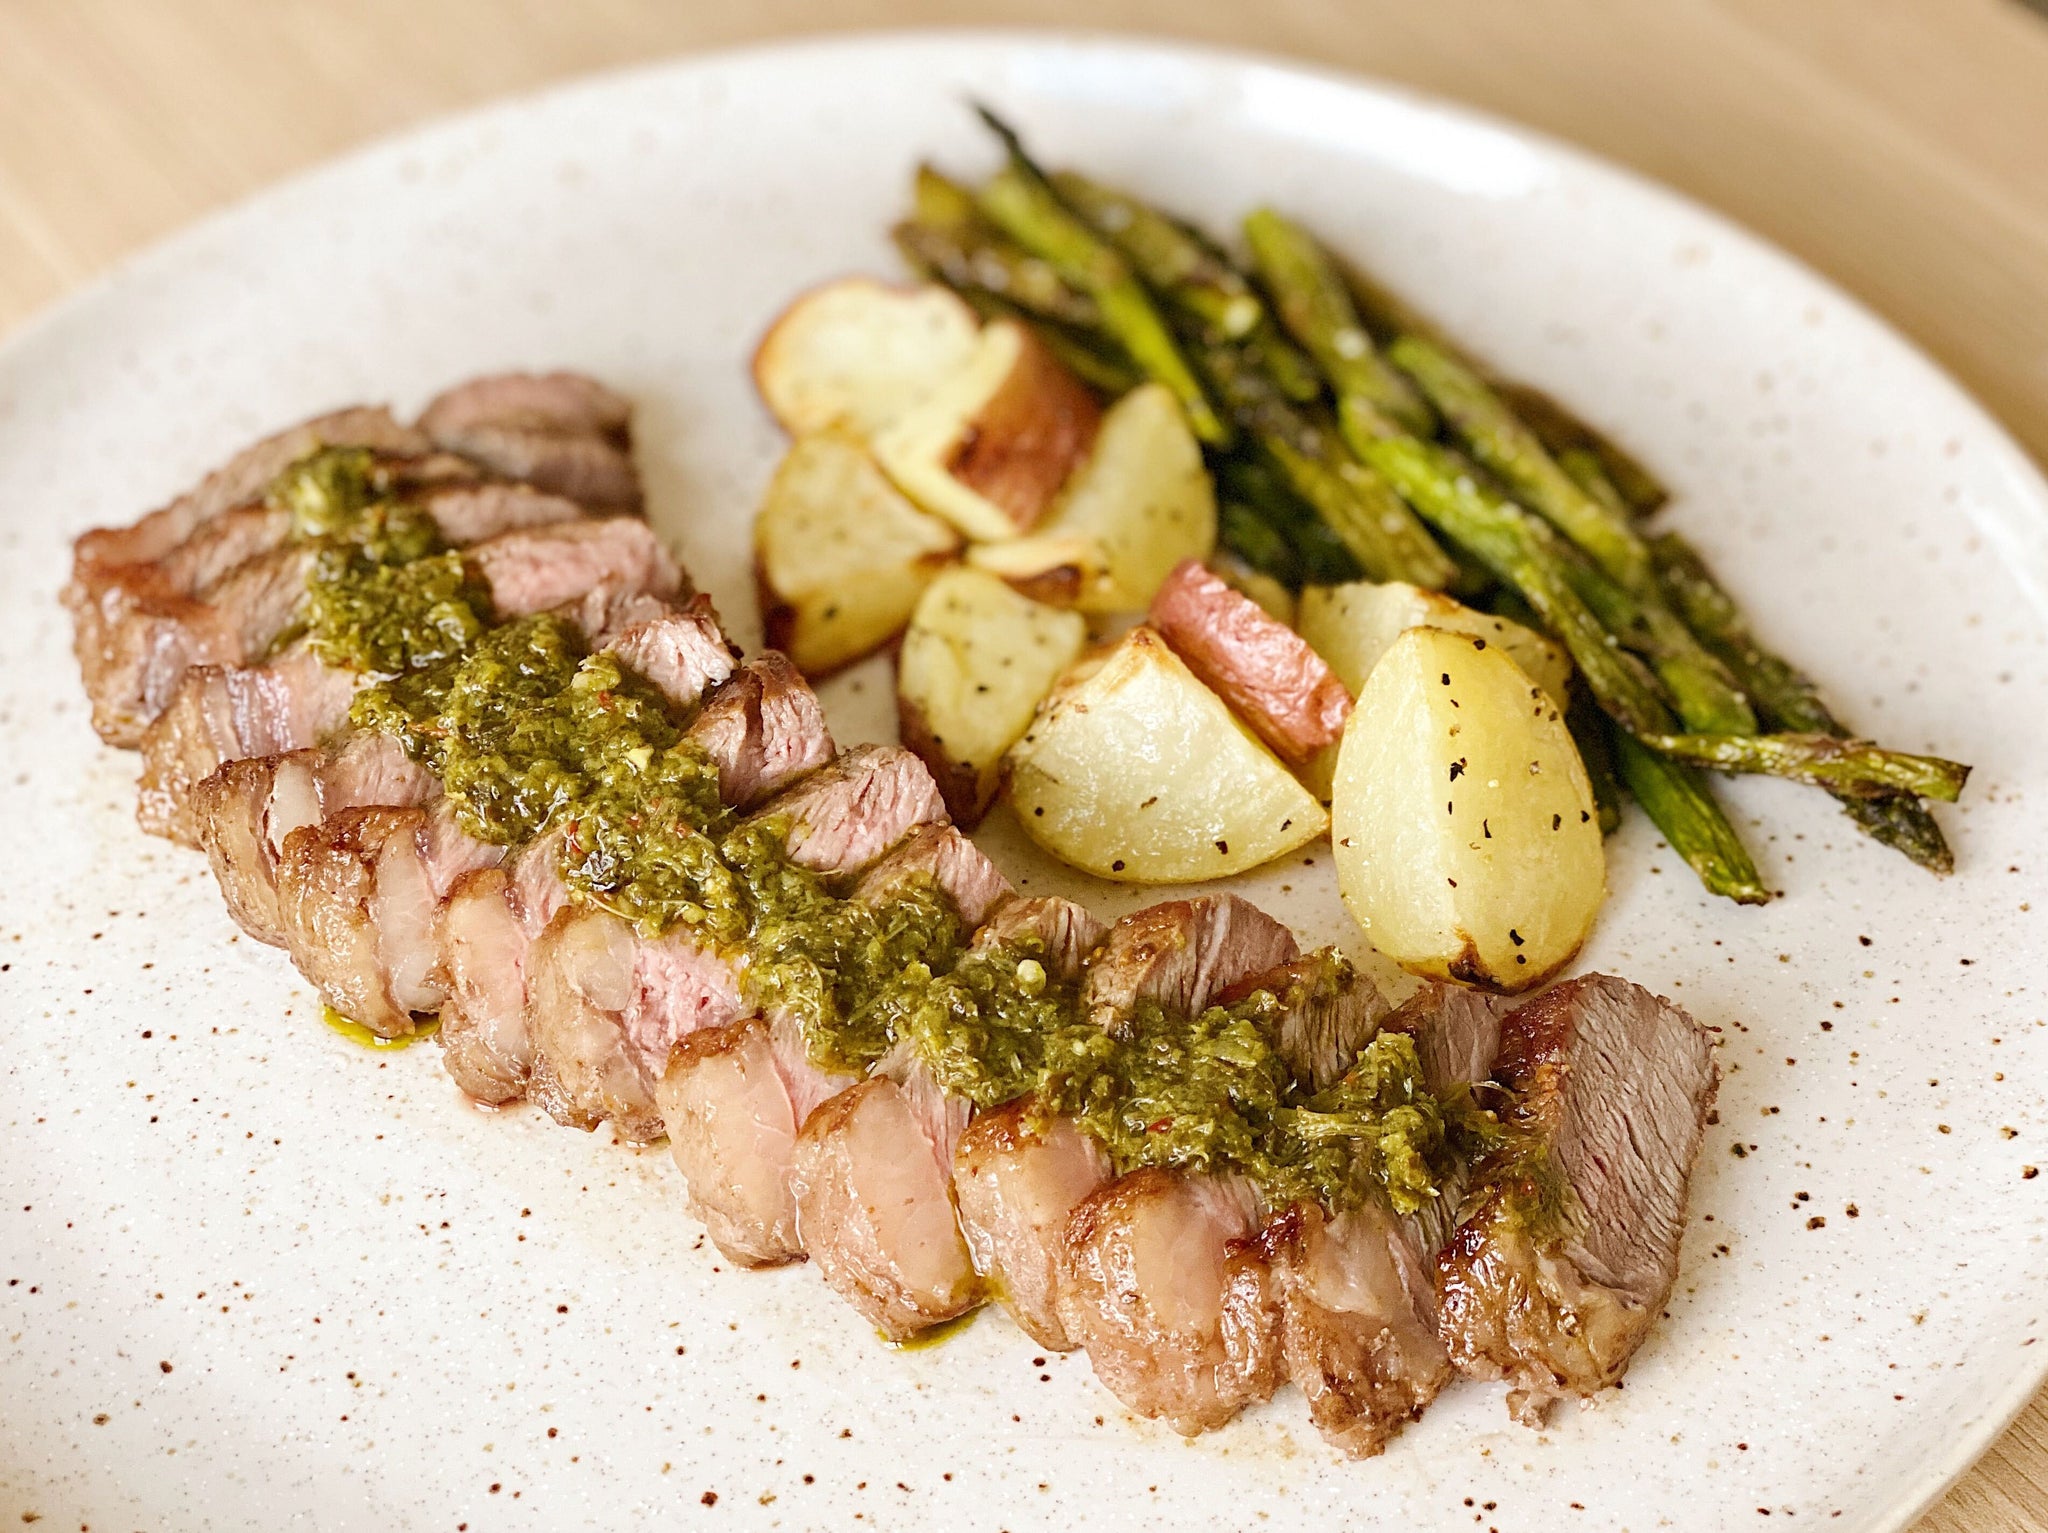 Grilled Chimichurri Strip Steak with Asparagus and Garlicky Potatoes